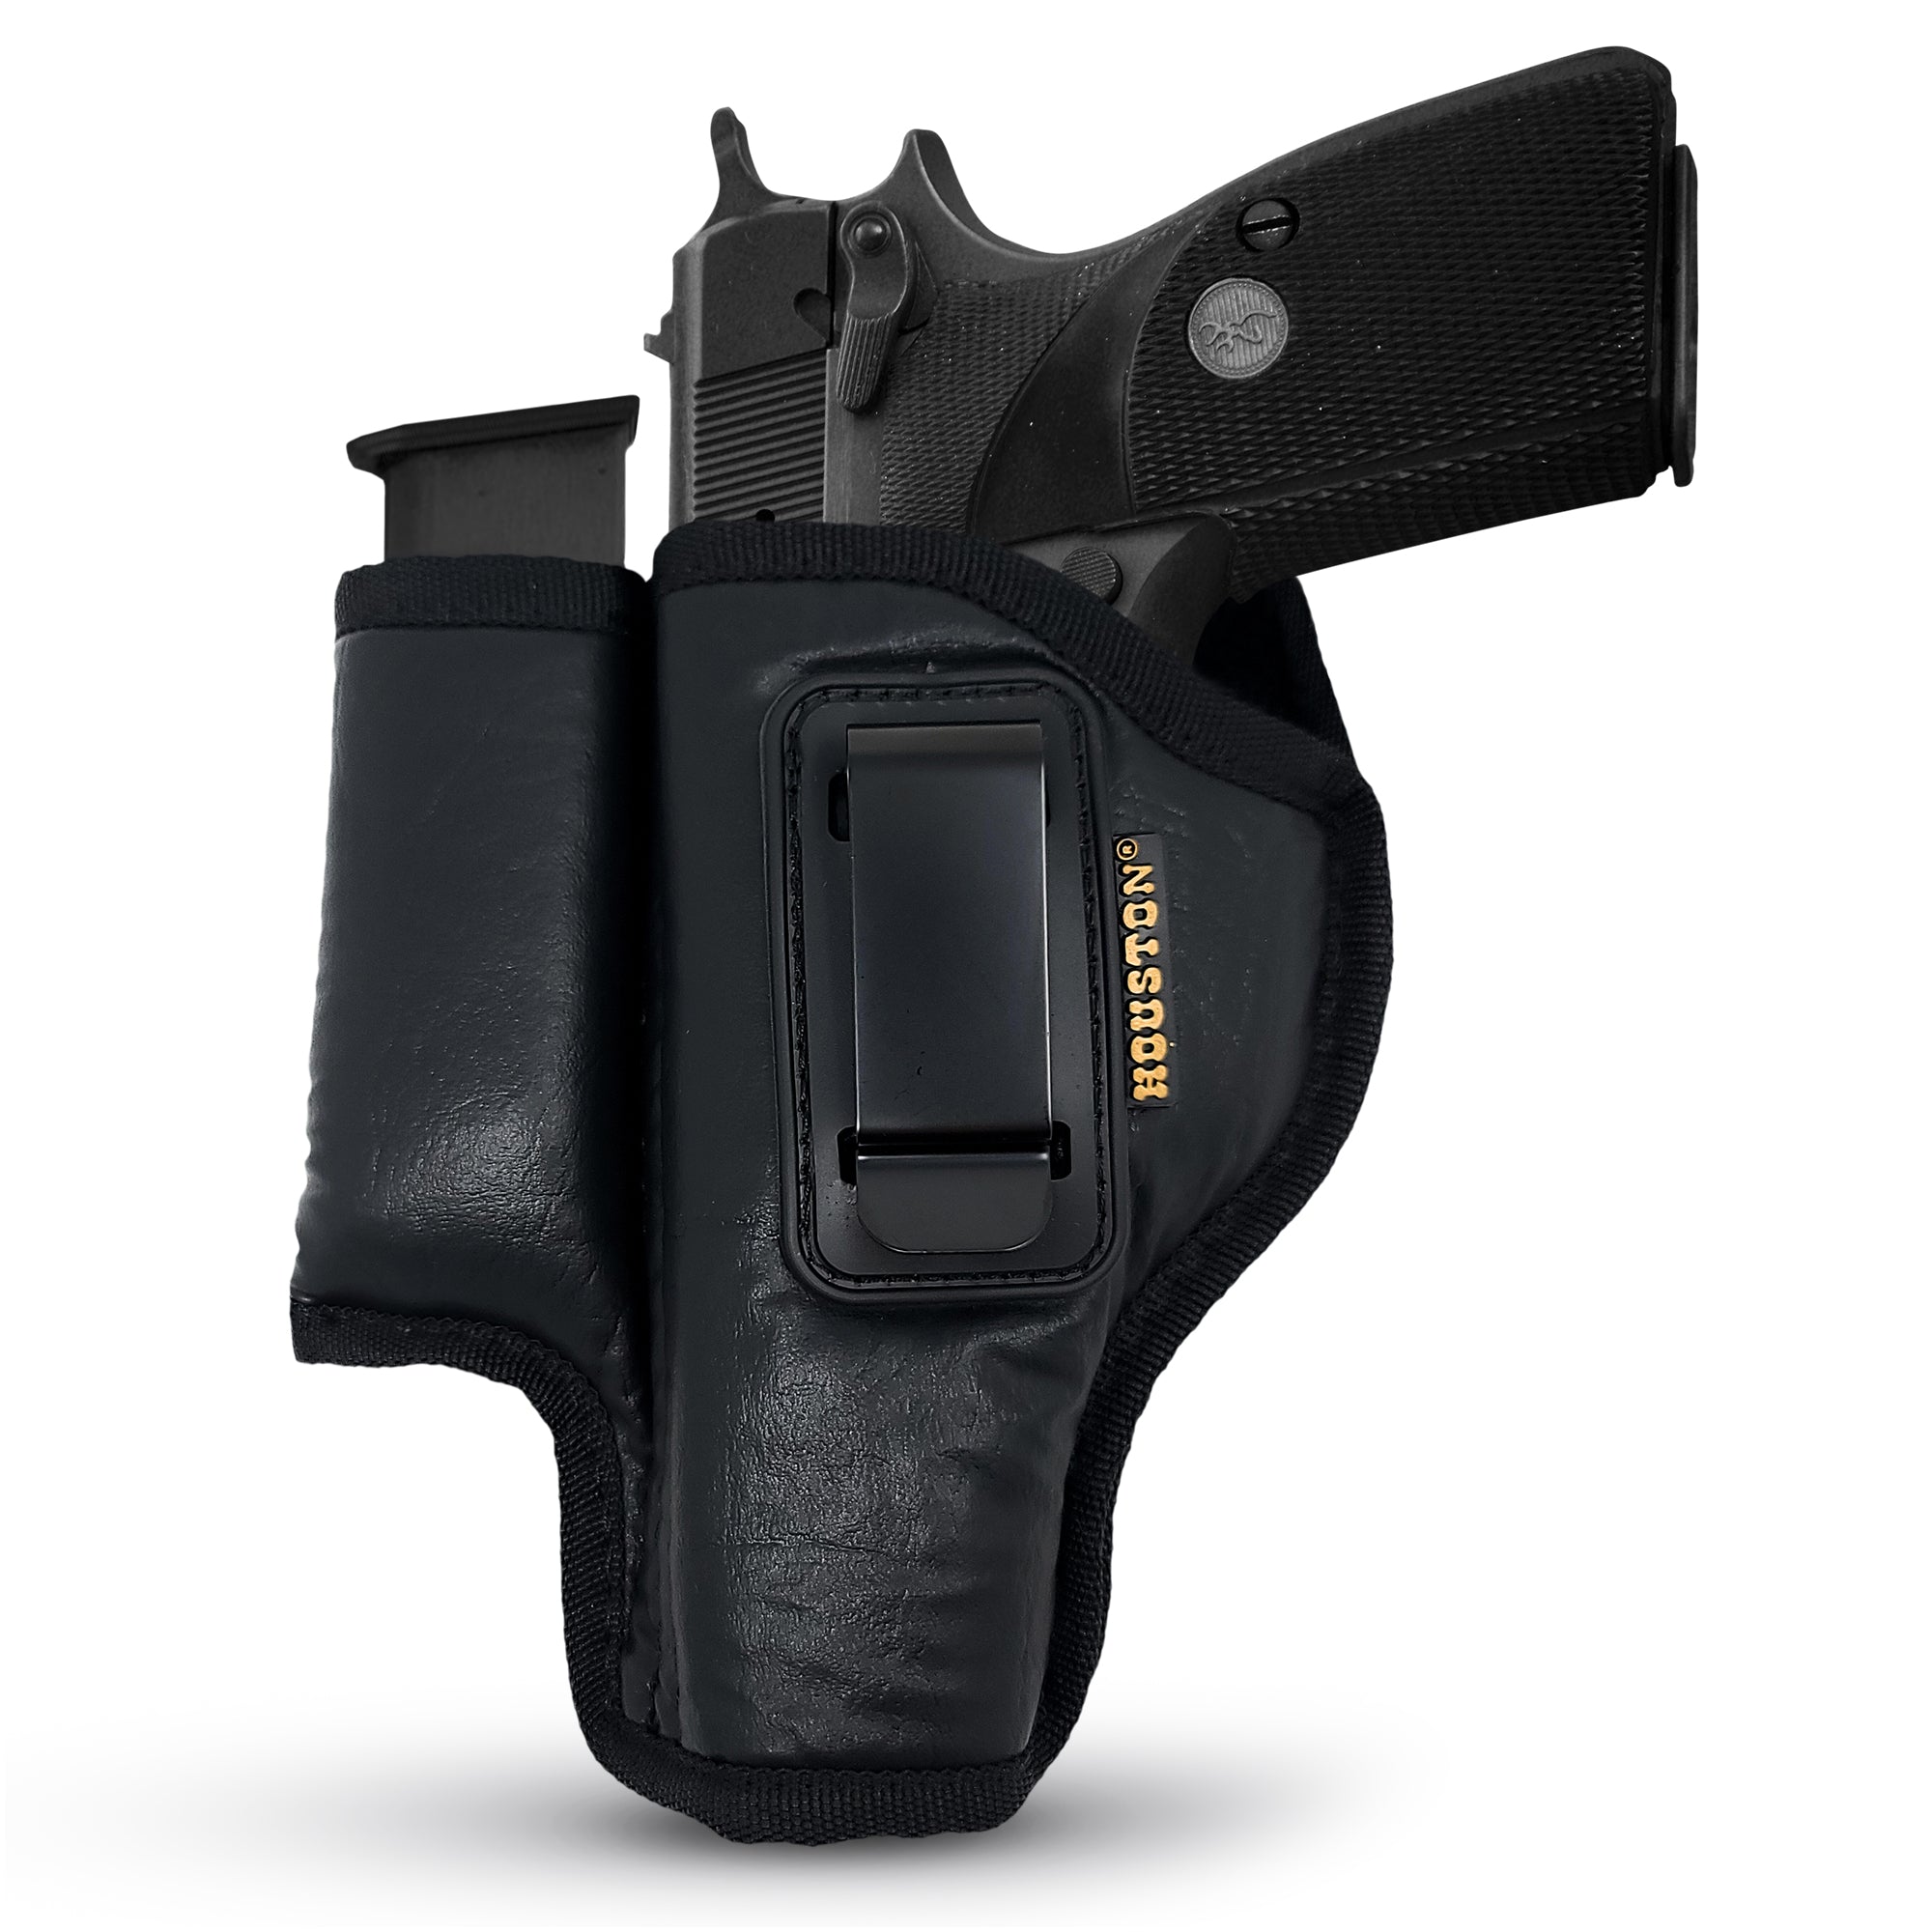  LandFoxtac Gun Holster for Pistols 9mm 380 45ACP, IWB/OWB  Concealed Carry Pistol Holsters with Mag Pouch for Men/Women, CCW Right &  Left Hand Gun Holder Fits Glock S&W M&P Sig 